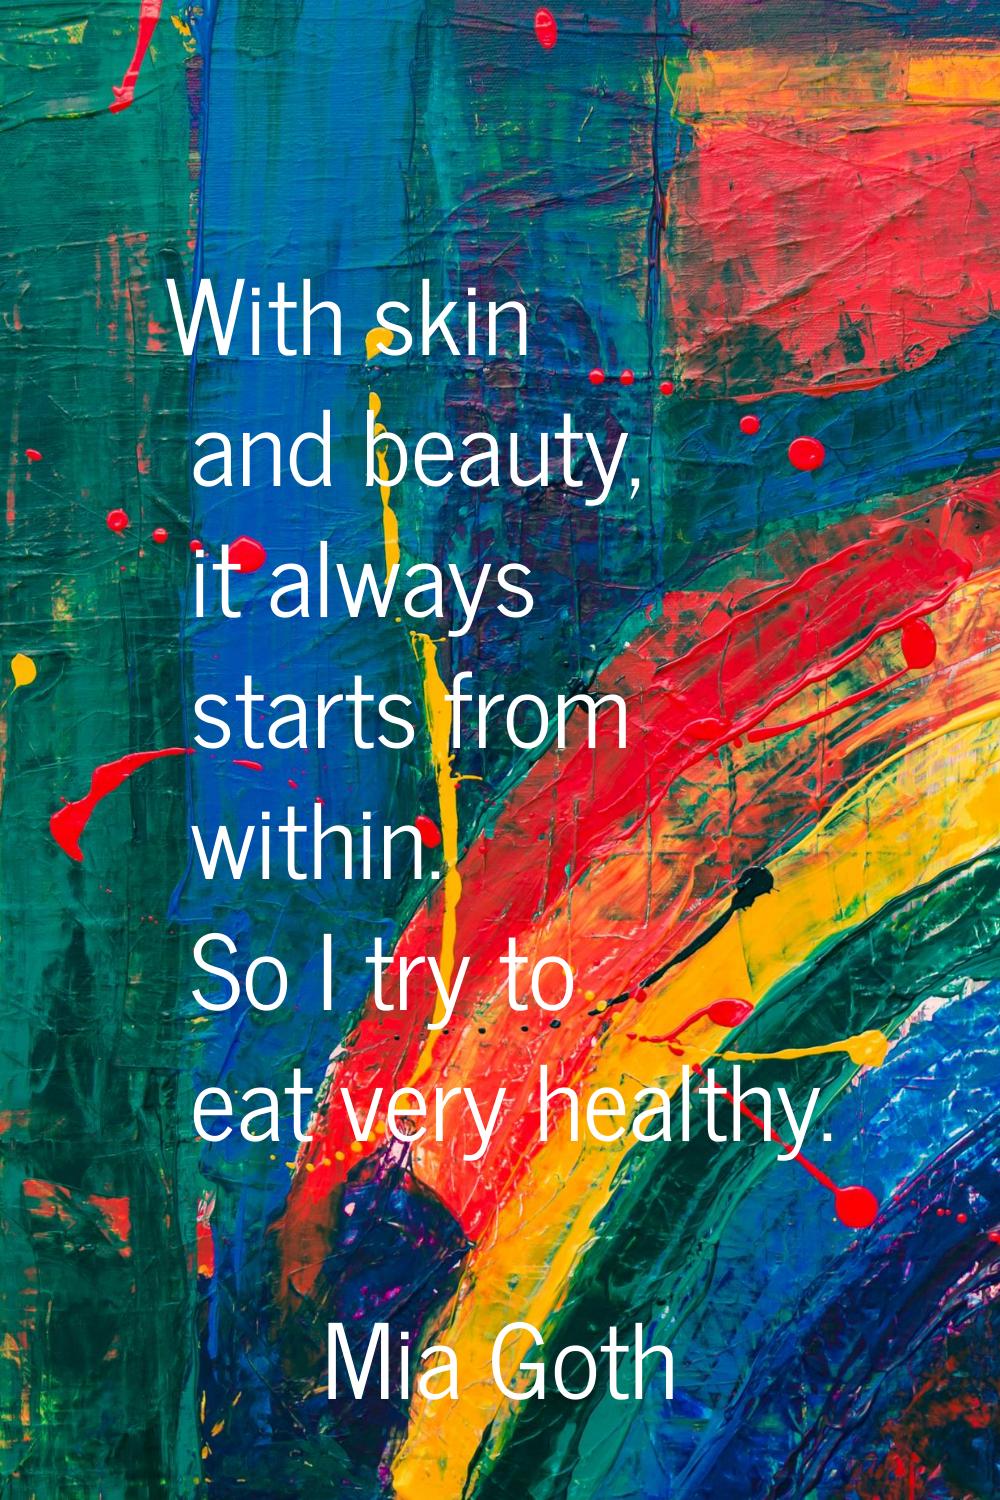 With skin and beauty, it always starts from within. So I try to eat very healthy.